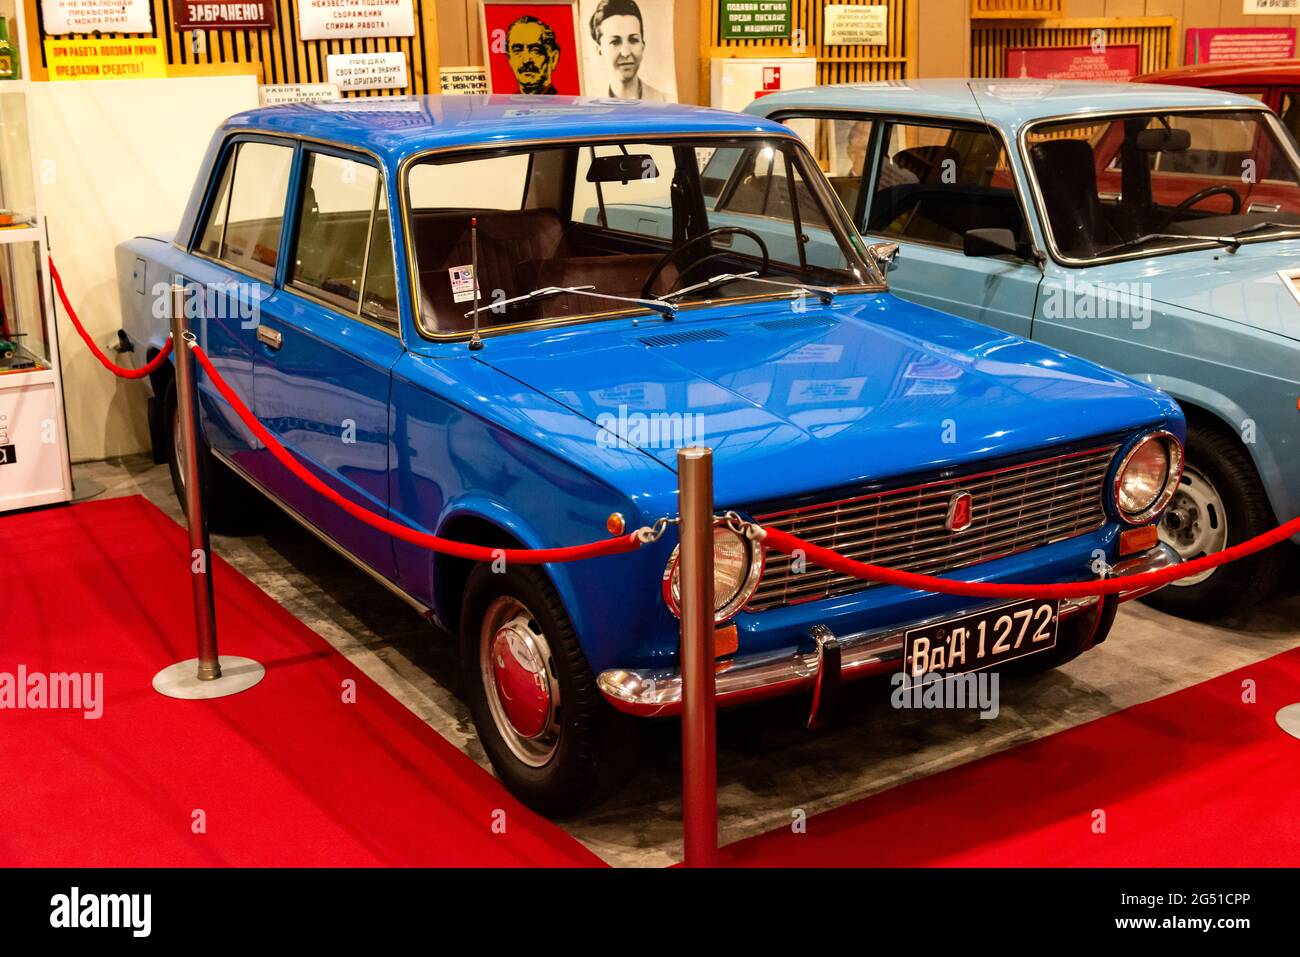 Car museum. Russian car LADA 2101 or VAZ 2101 Zhiguli from the 1980s on display at the Cars of Socialism museum in the town of Peshtera, Bulgaria, Eastern Europe Stock Photo